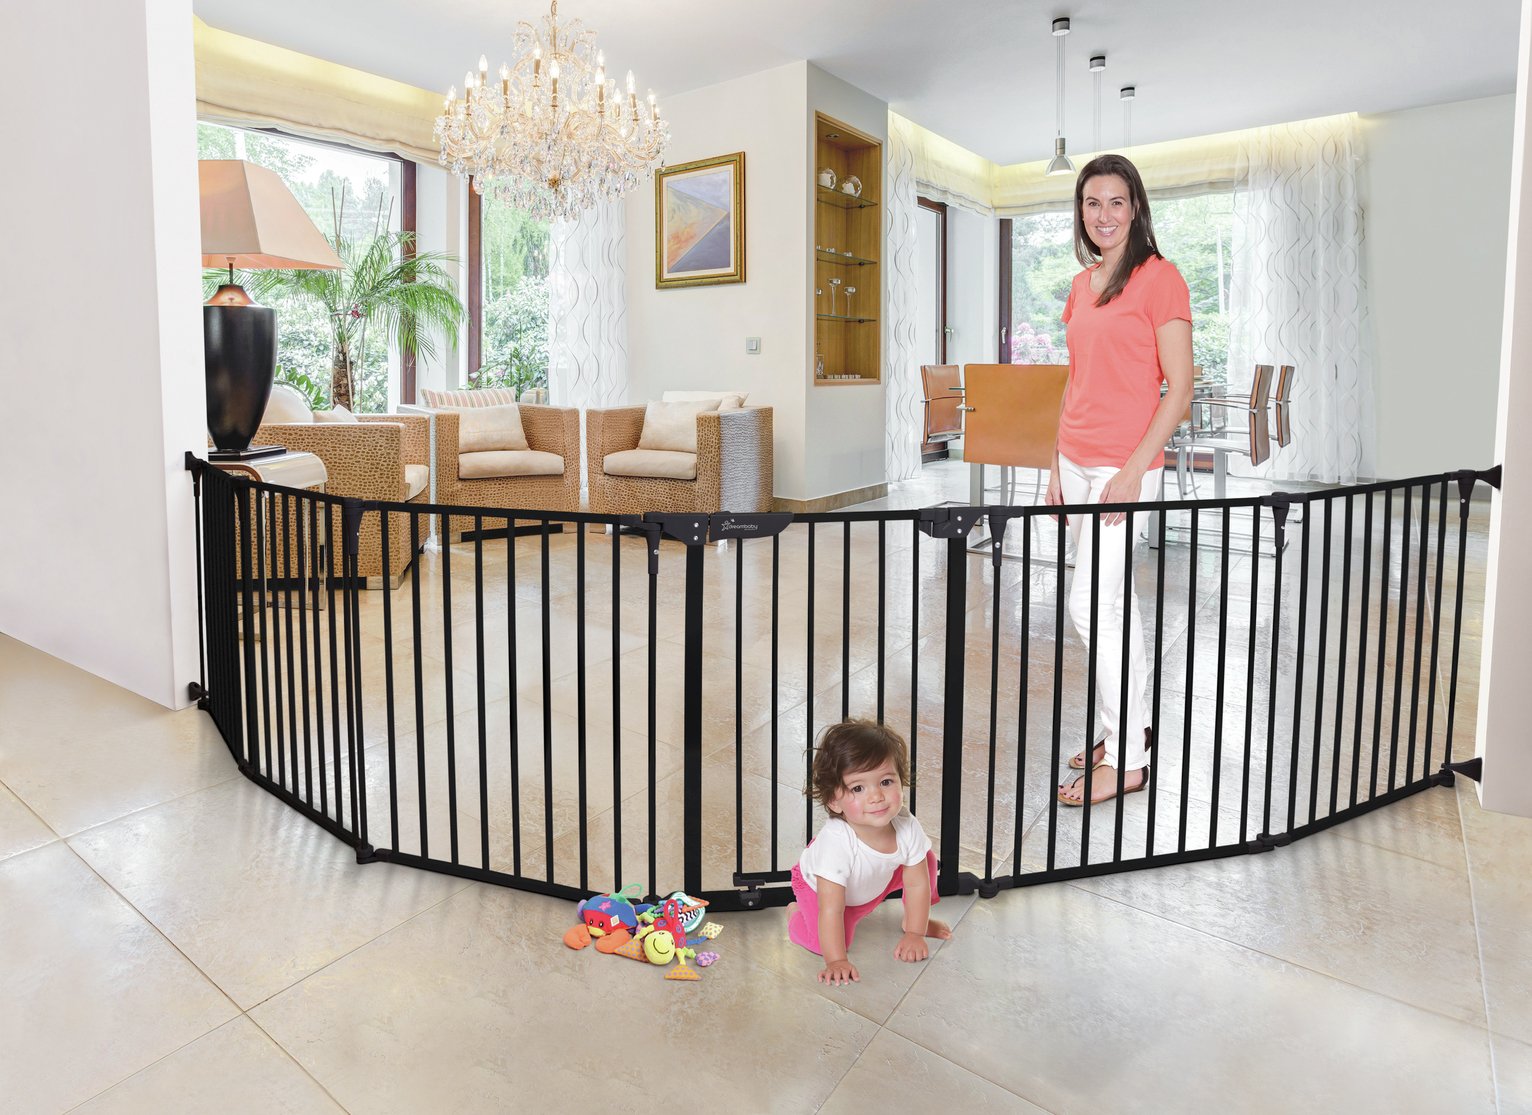 Dreambaby Royale Converta 3-In-1 Playpen/Barrier/Firebarrier Review